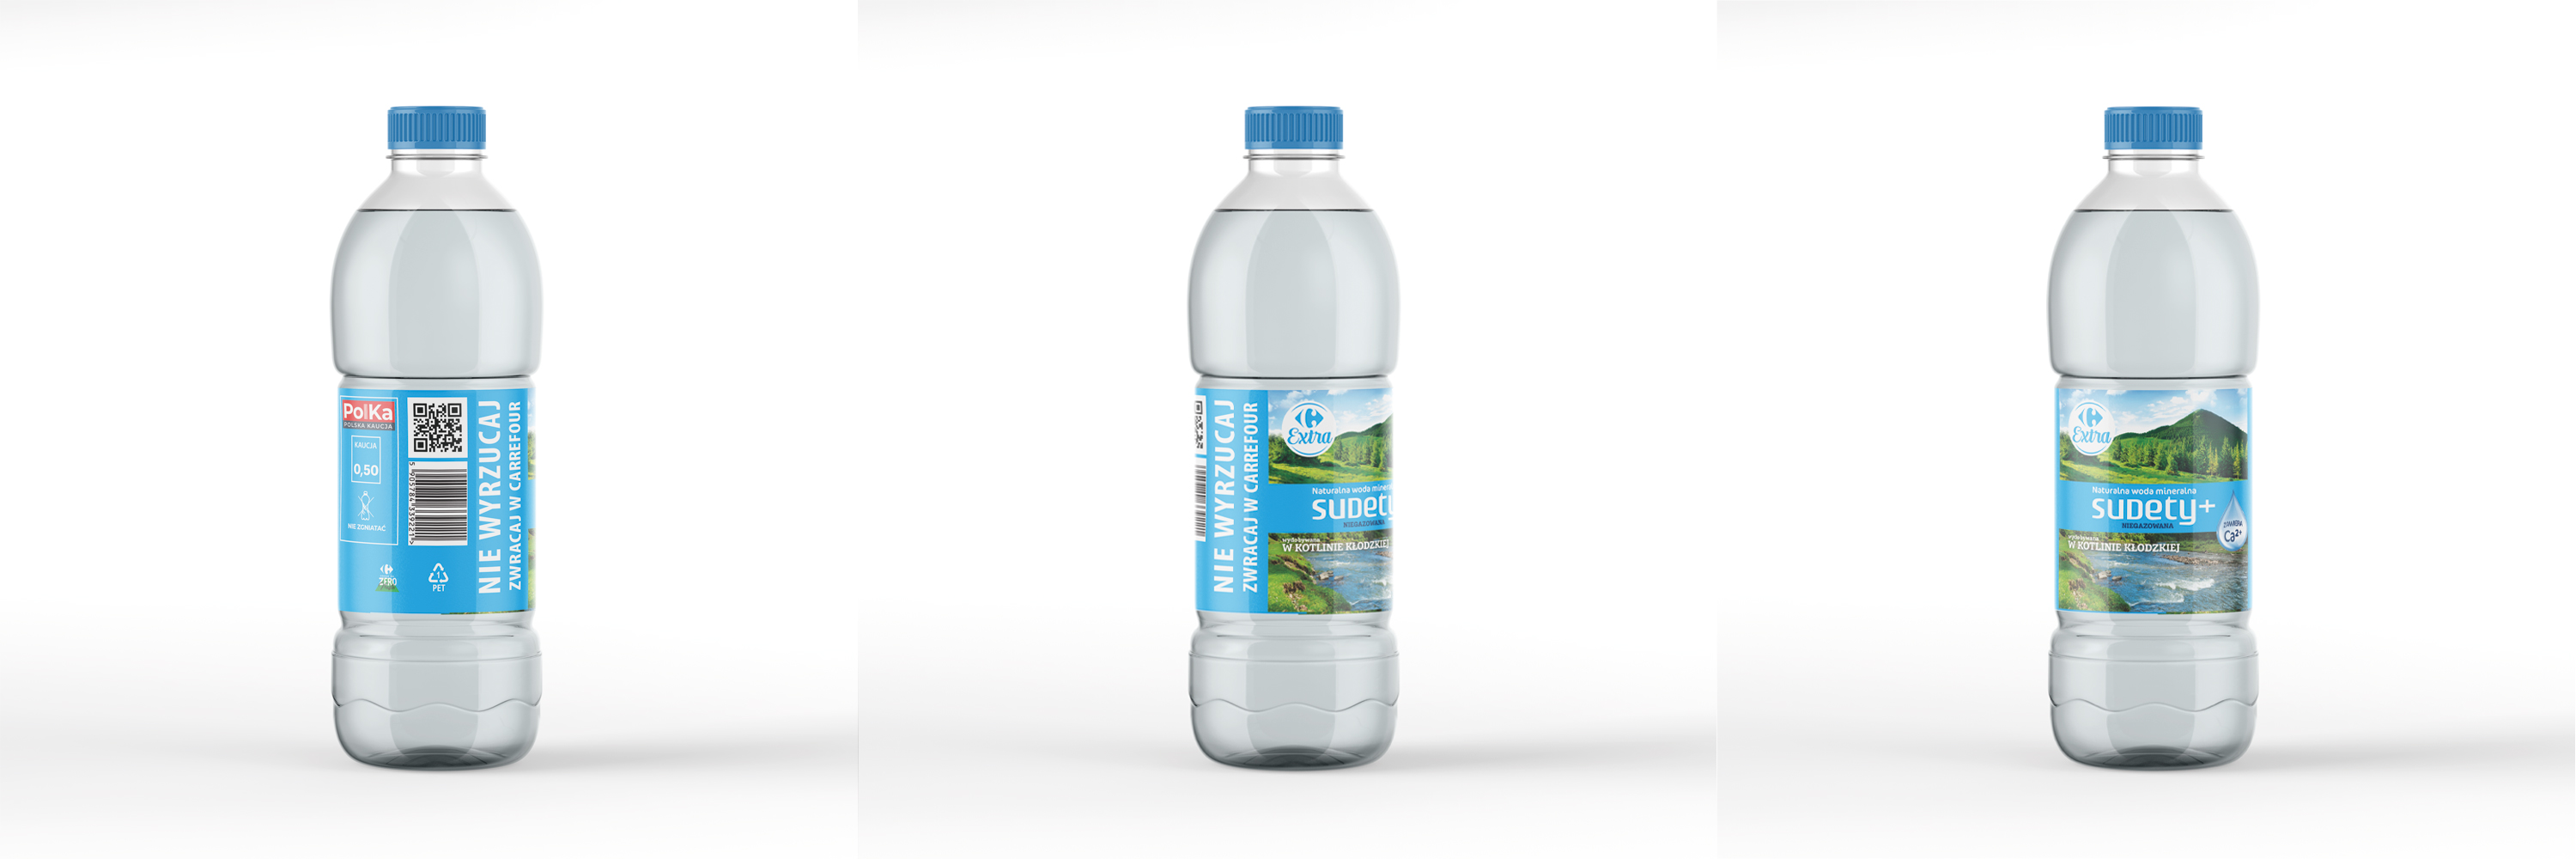 Carrefour with the first bottle in Poland that meets the requirements and sets trends in the new deposit system